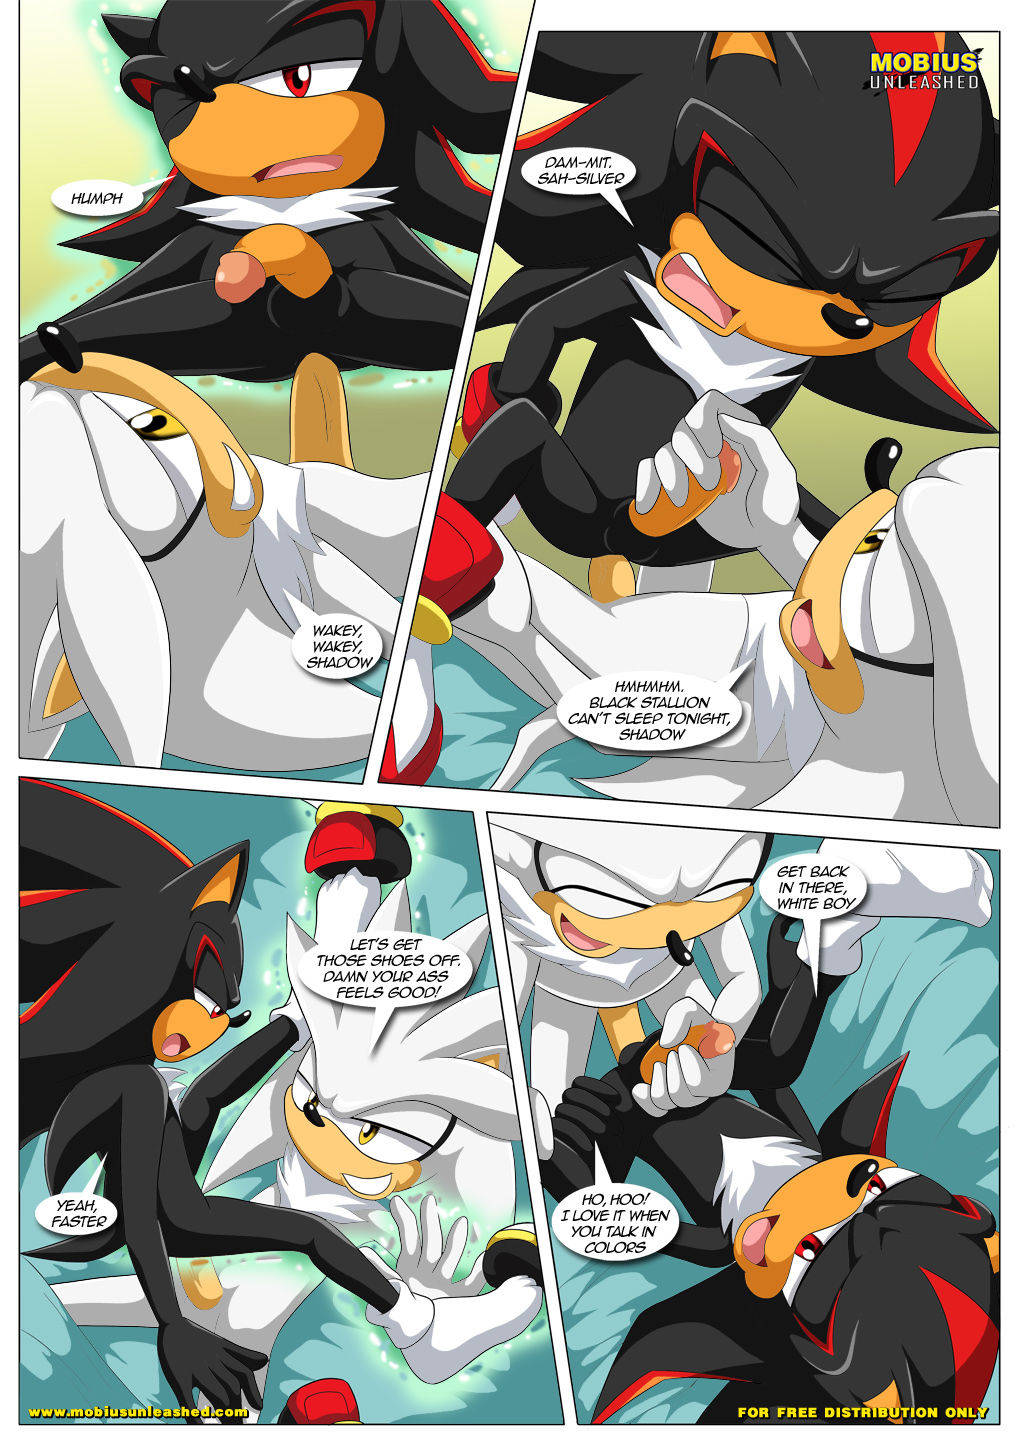 Frisky Levy Hogs (Sonic The Hedgehog) by Palcomix page 3